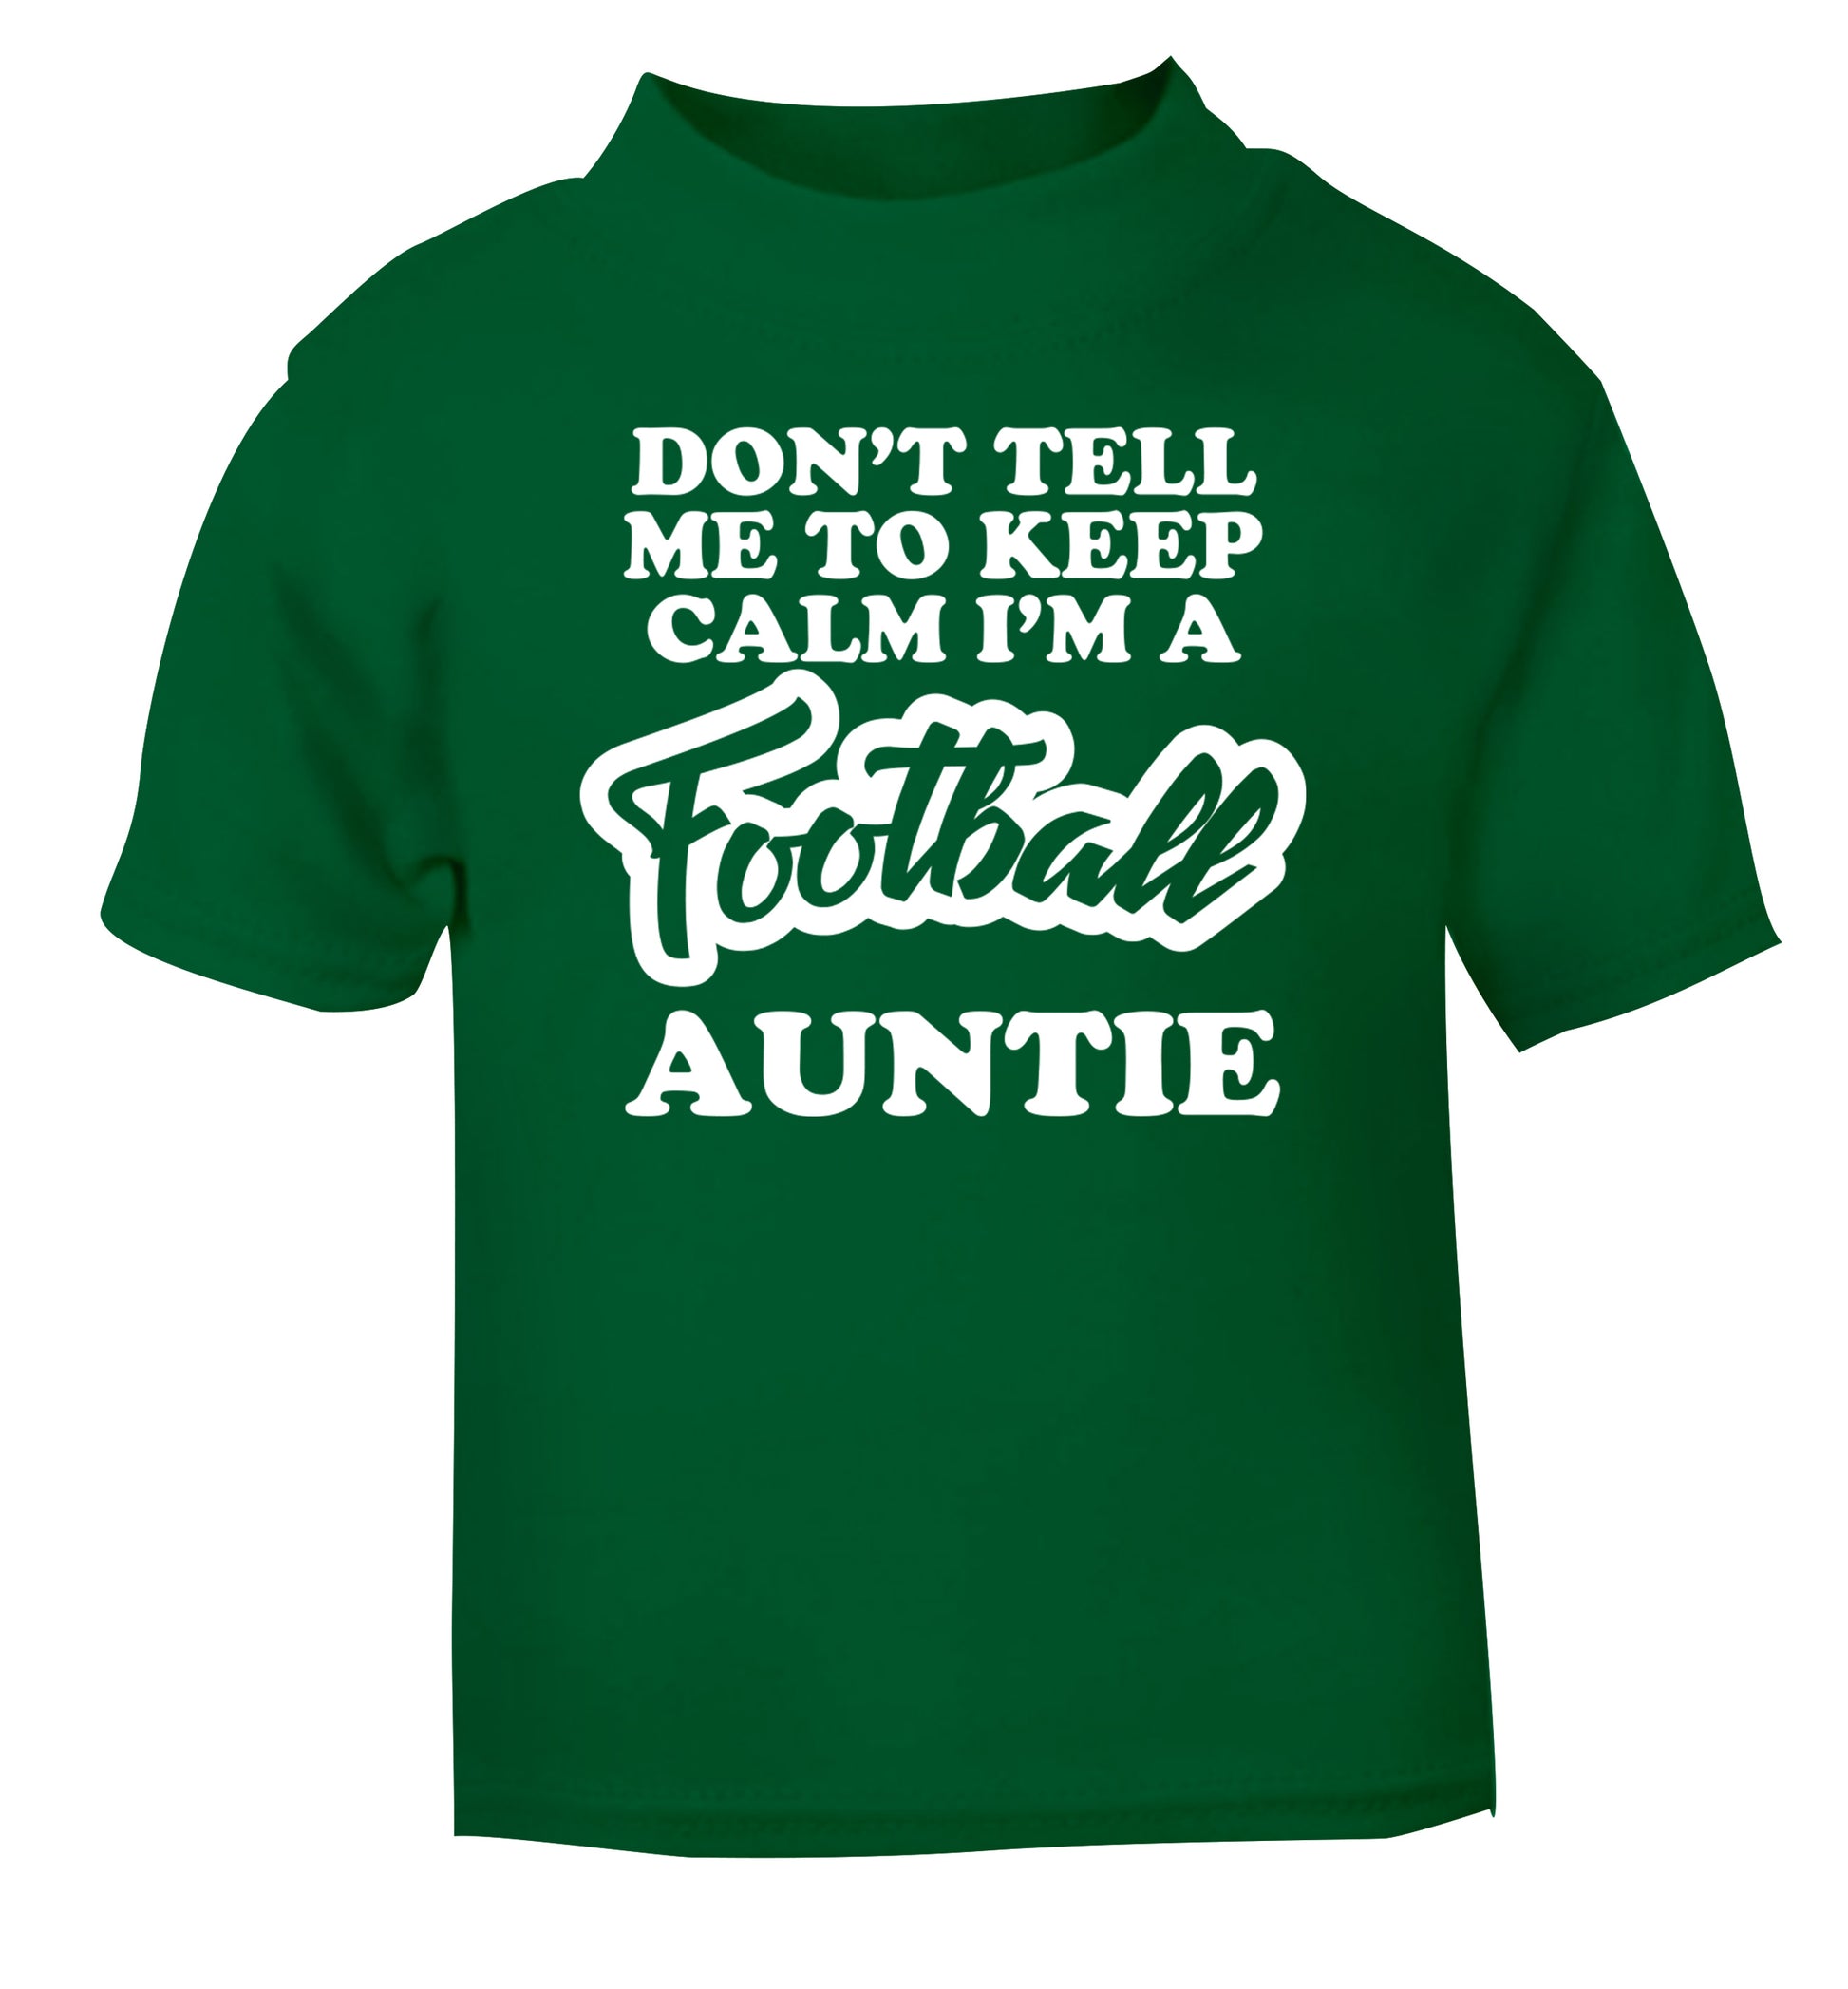 Don't tell me to keep calm I'm a football auntie green Baby Toddler Tshirt 2 Years